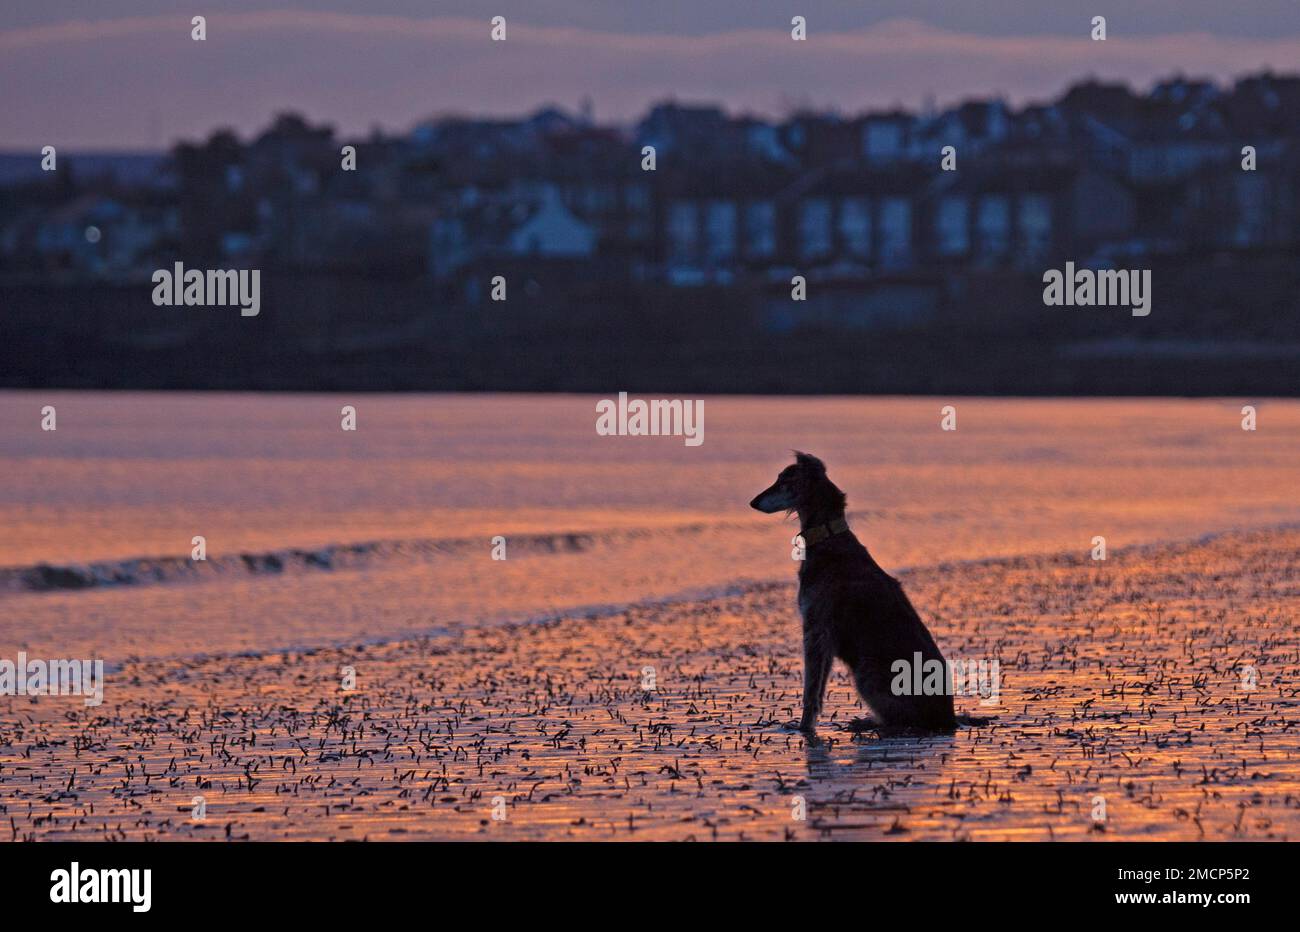 Portobello, Edinburgh, Scotland, UK. 22 January 2023. Fiery sunrise by the Firth of Forth with a slighlty milder but still nippy temperature of 5 degrees centigrade for those out and about at the seaside. Pictured: Lucy the cross breed waits paitiently among the lugworms for her owner to head to the shore from her cold water swim. Credit: Scottishcreative/alamy live news. Stock Photo